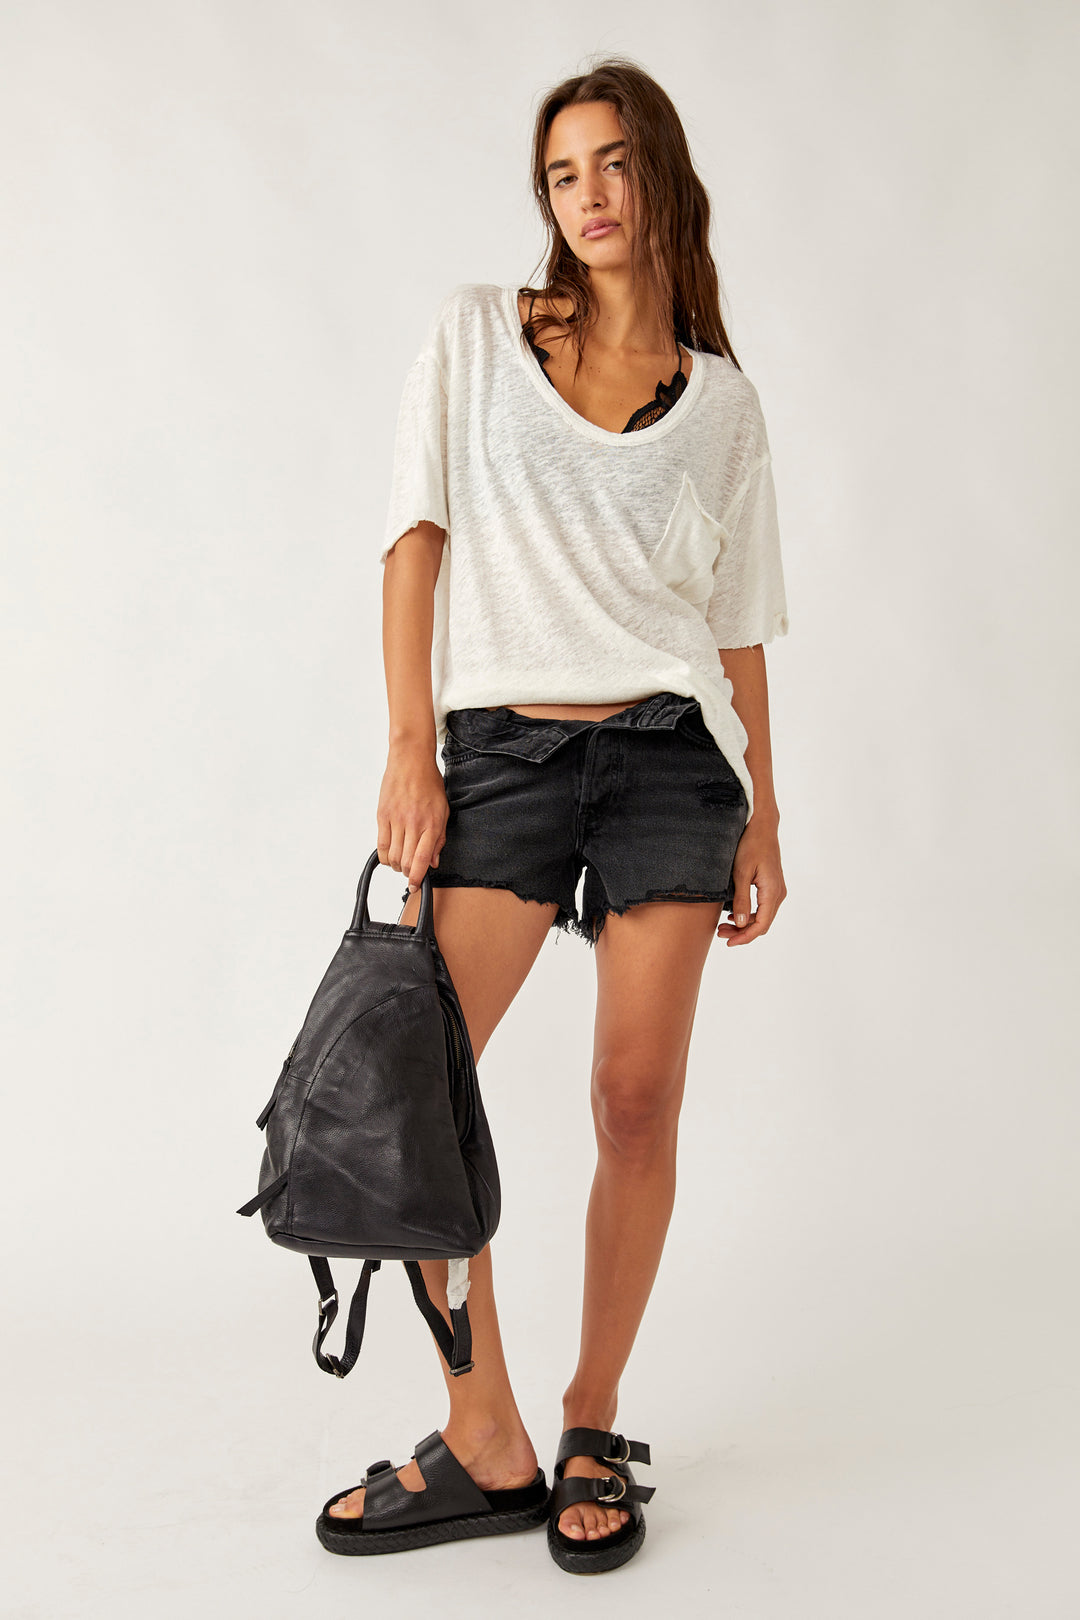 Free People Now Or Never Denim Shorts